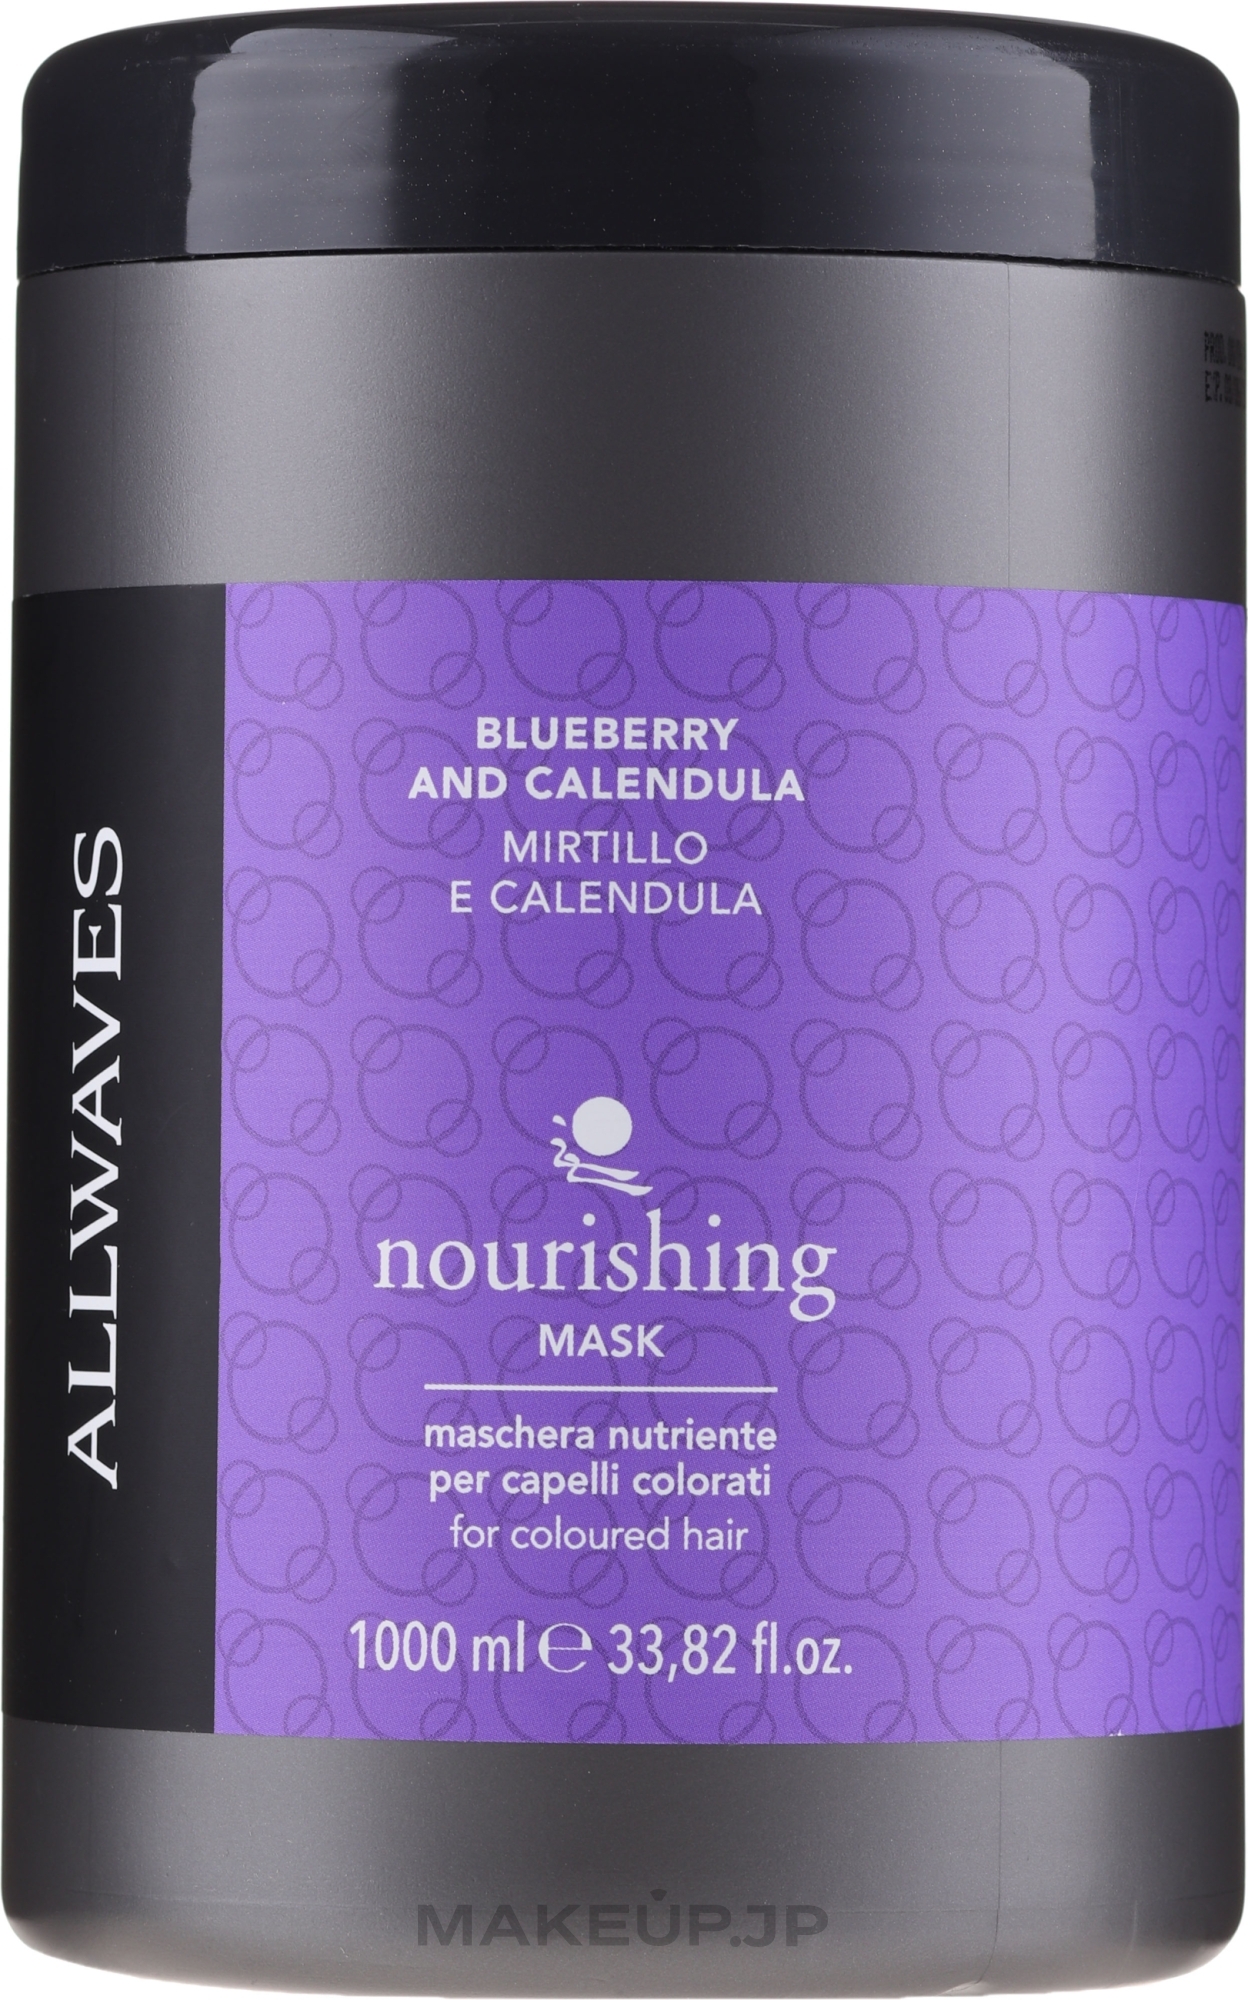 Nourishing After Coloring Hair Mask with Berries & Calendula Extracts - Allwaves Blueberry And Calendula Nourishing Mask — photo 1000 ml